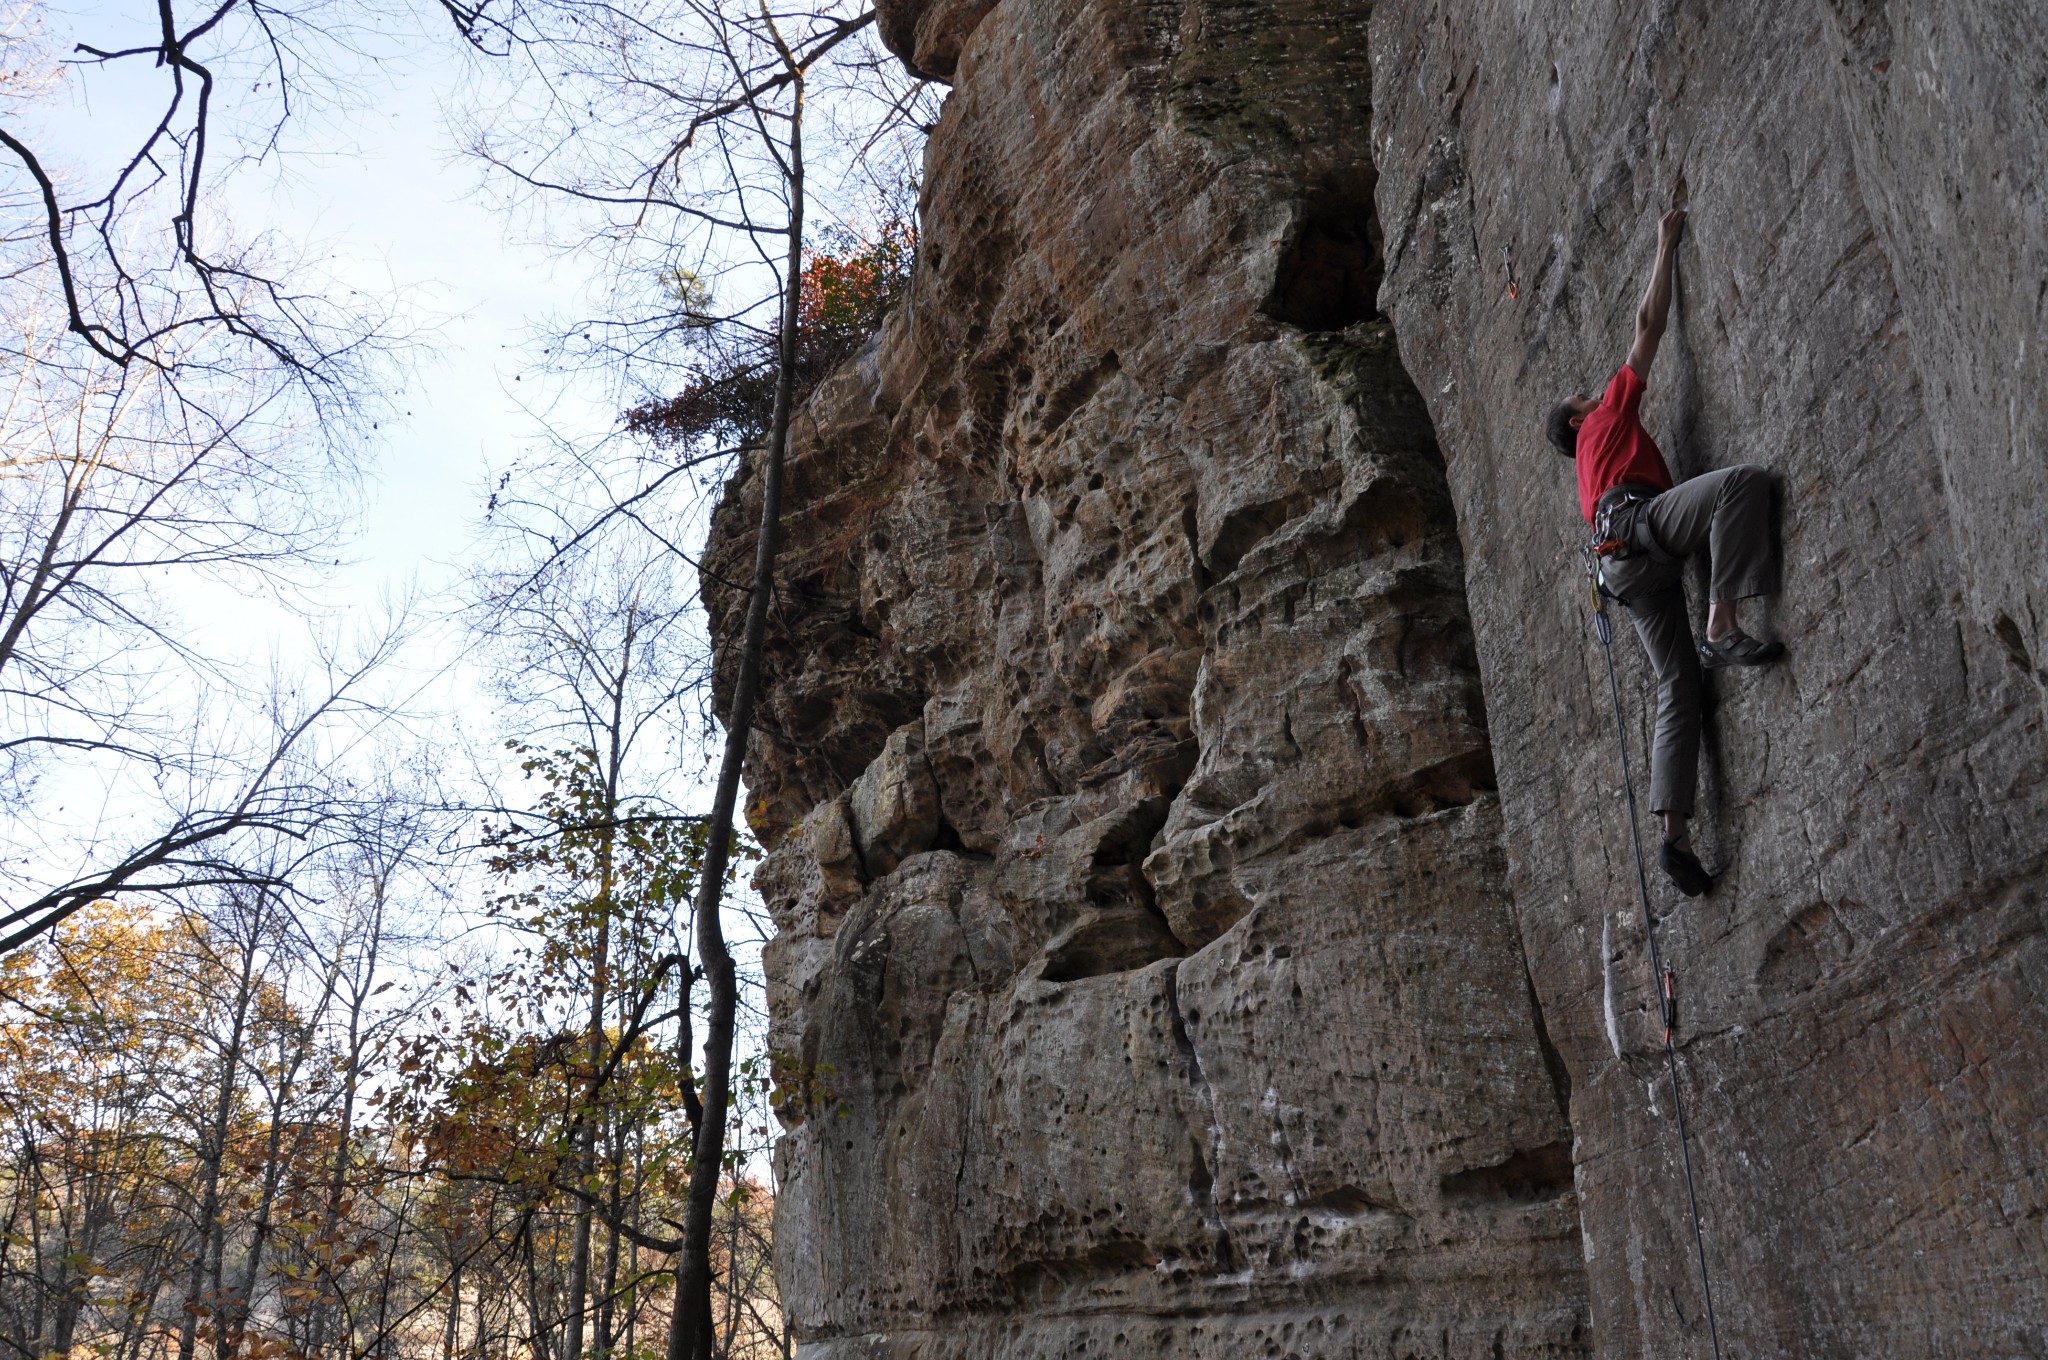 Me climbing Random Precision at the Red River Gorge